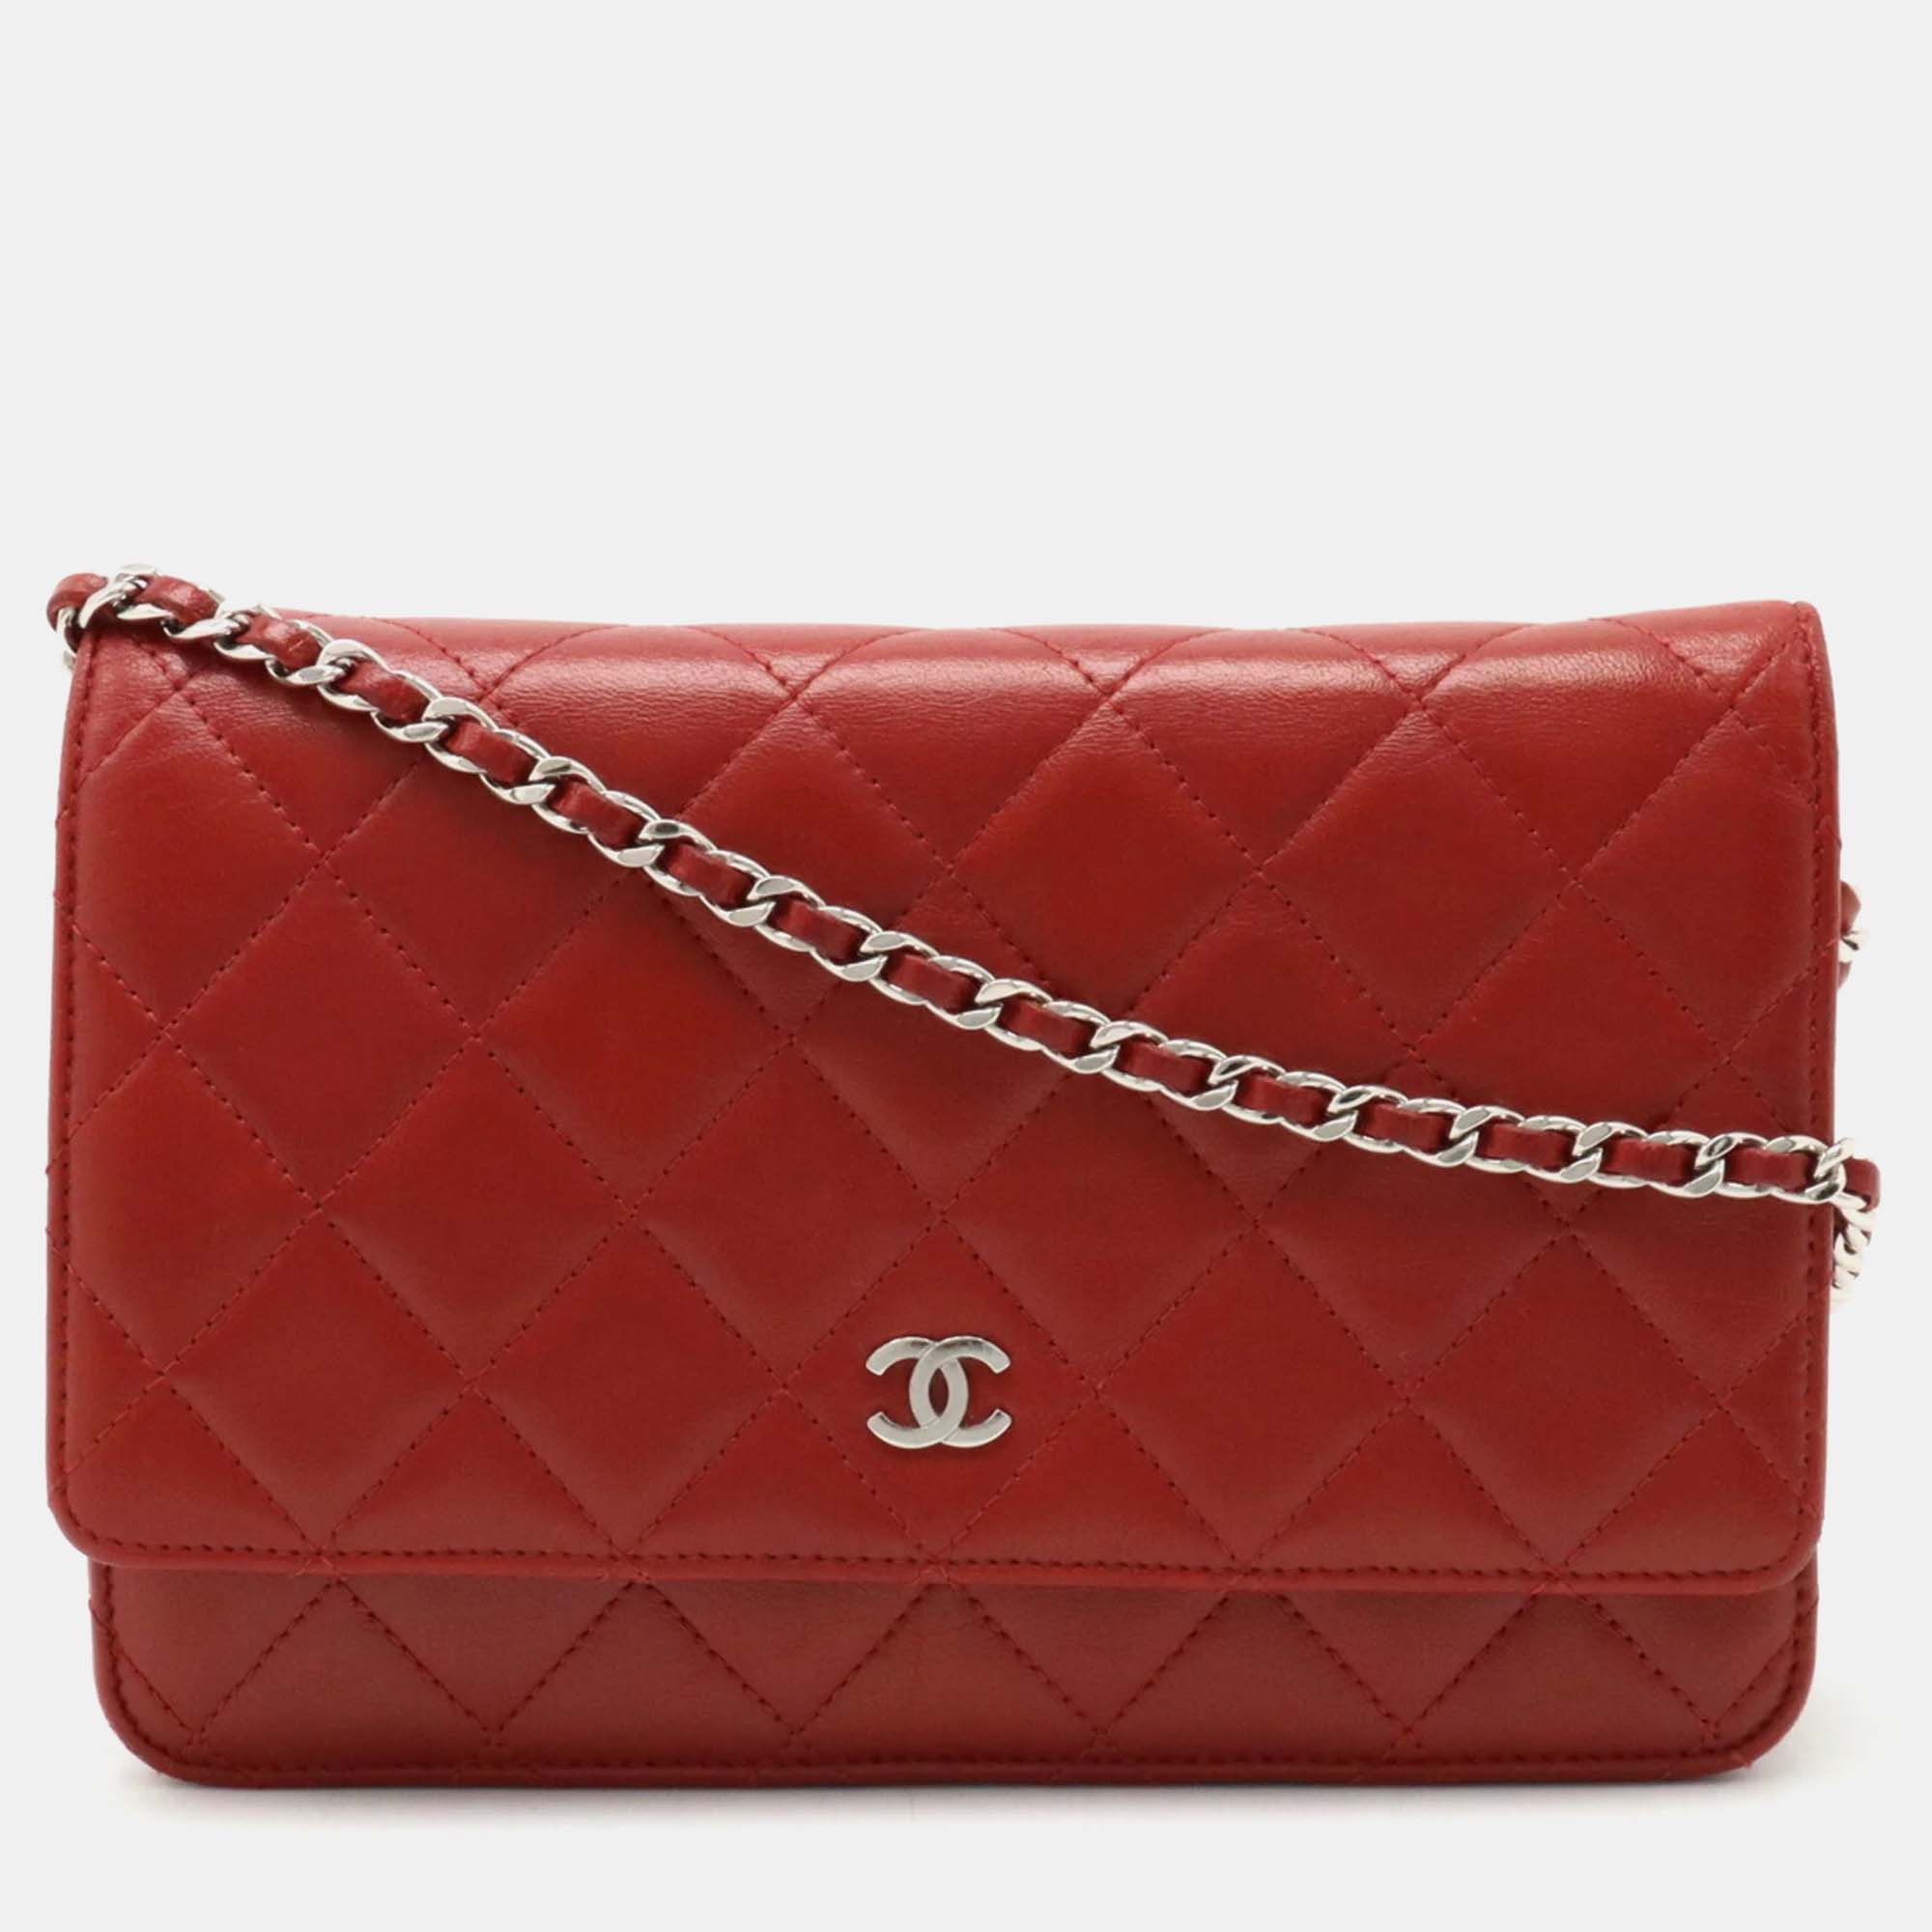 Chanel red leather classic wallet on chain